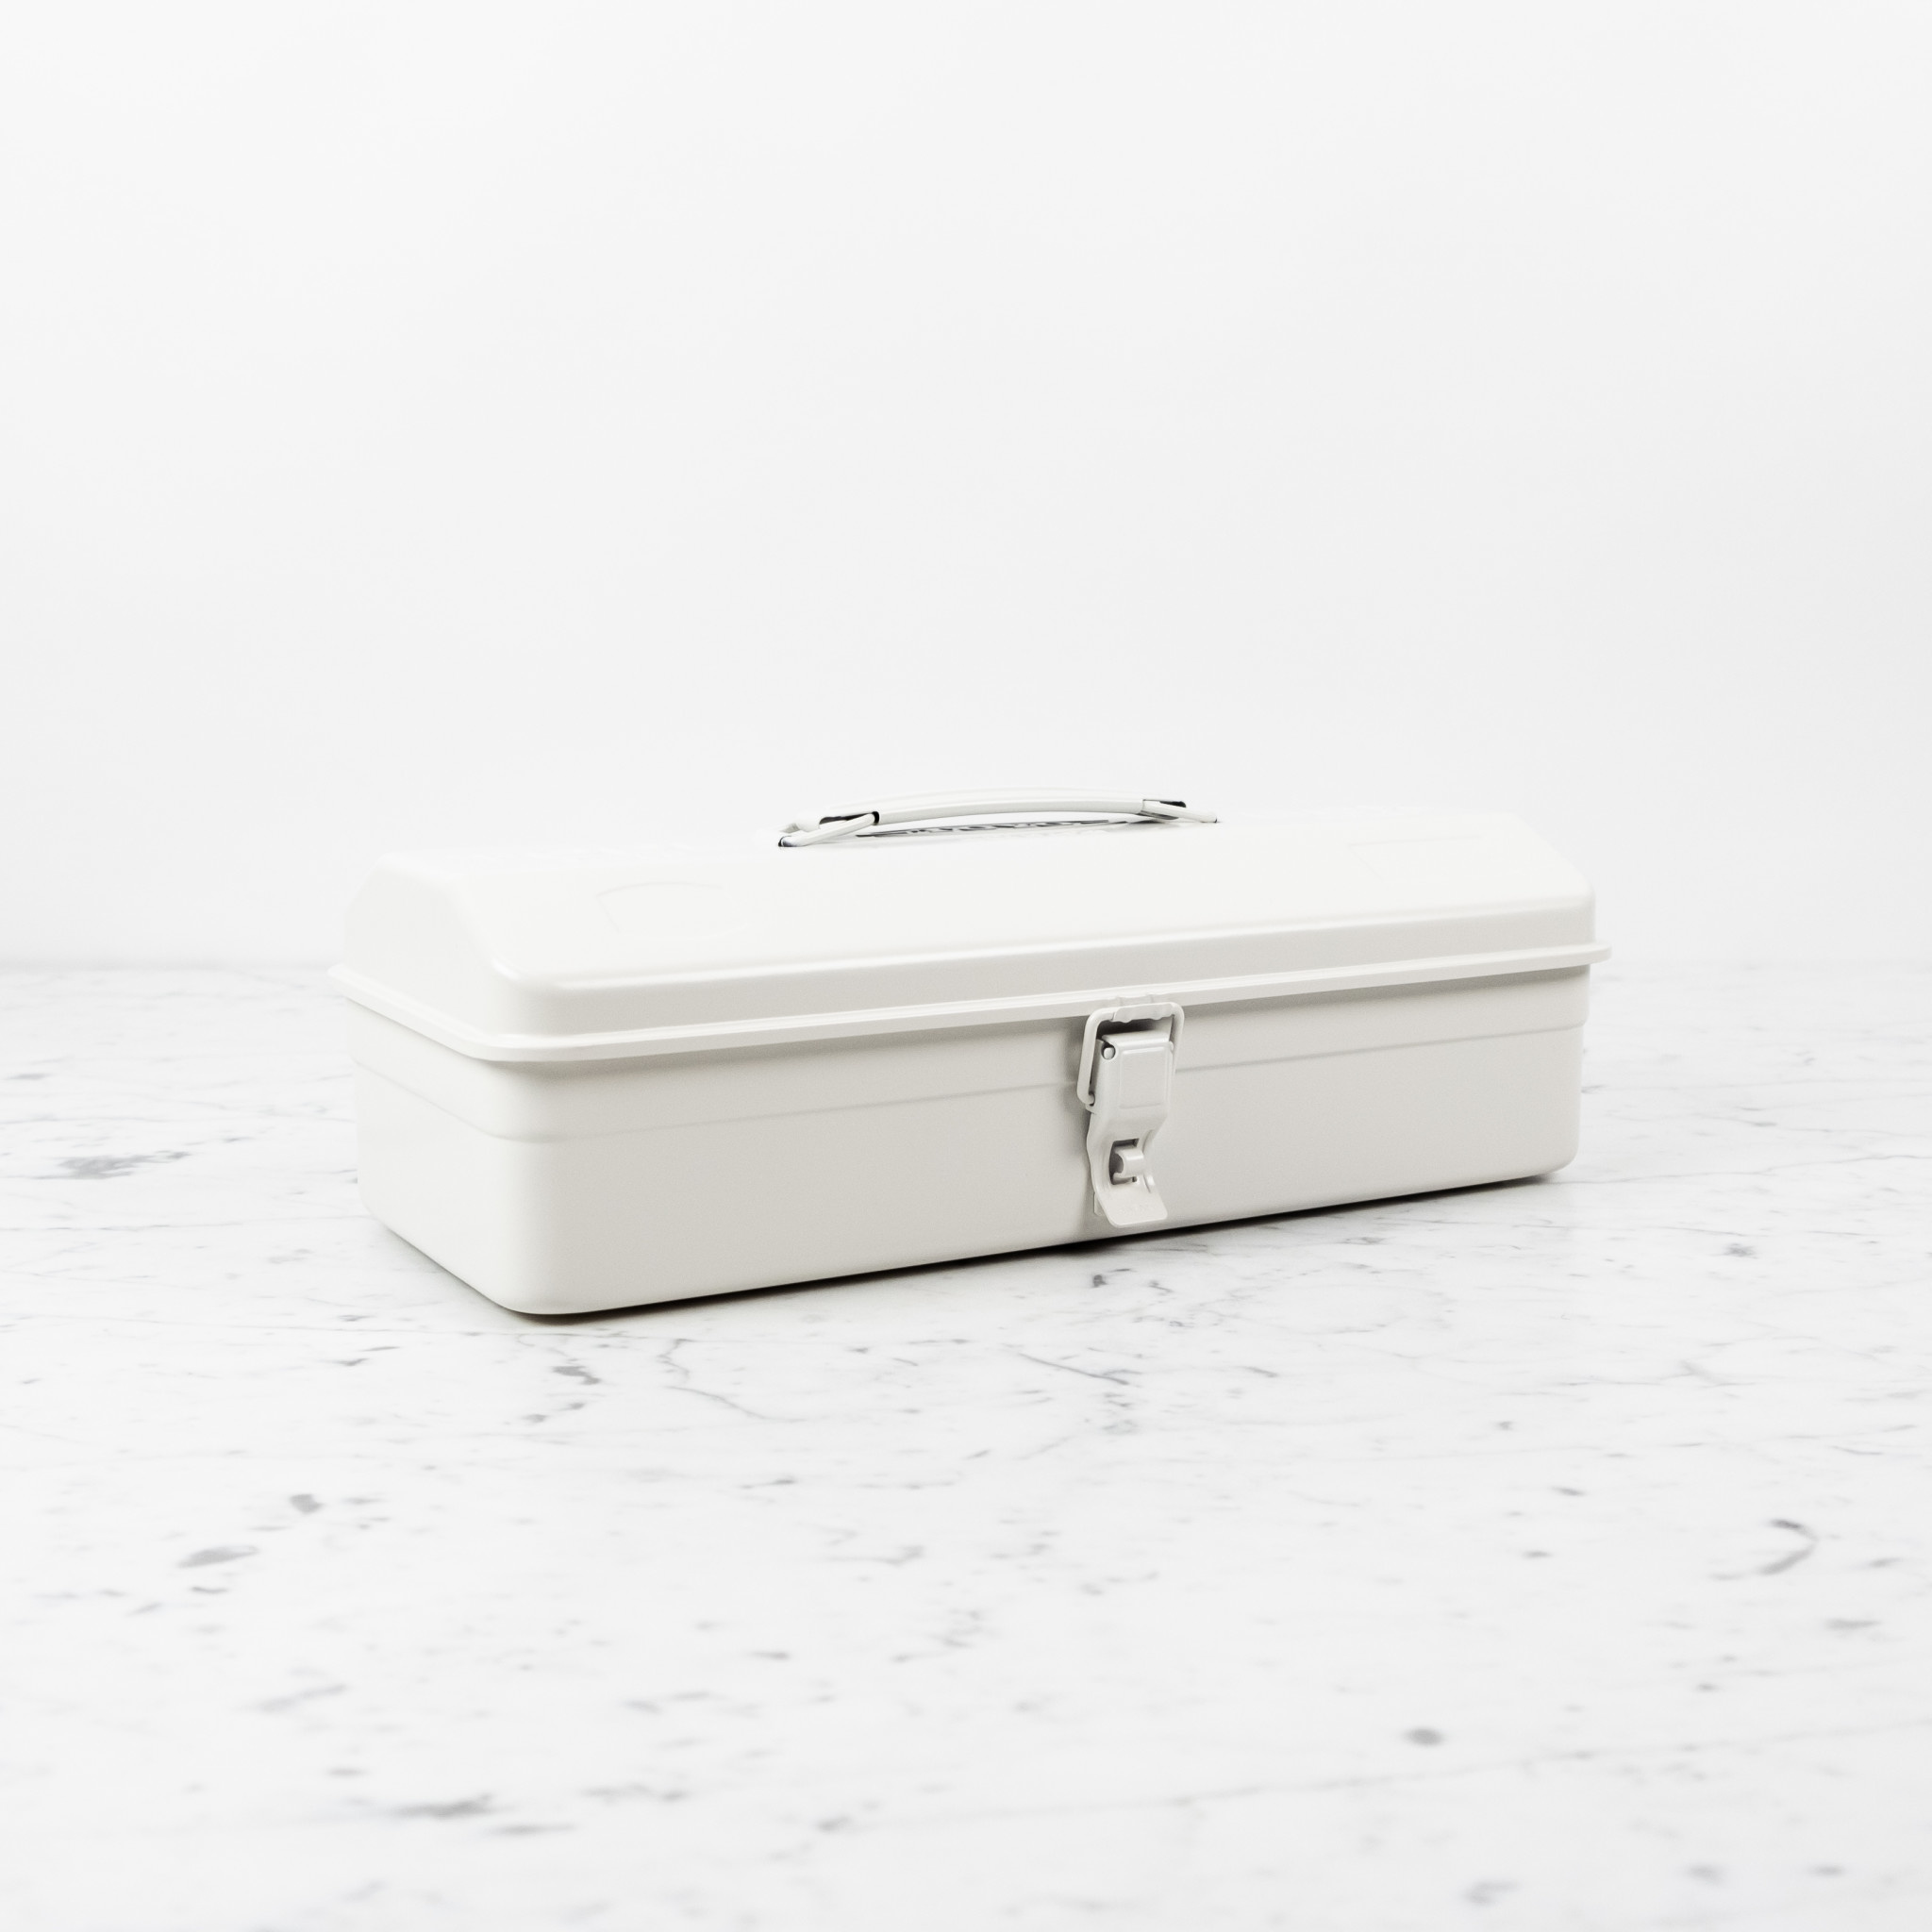 Toyo Japanese Steel Tool Box with Latch - Style Y-350 - White - 14"